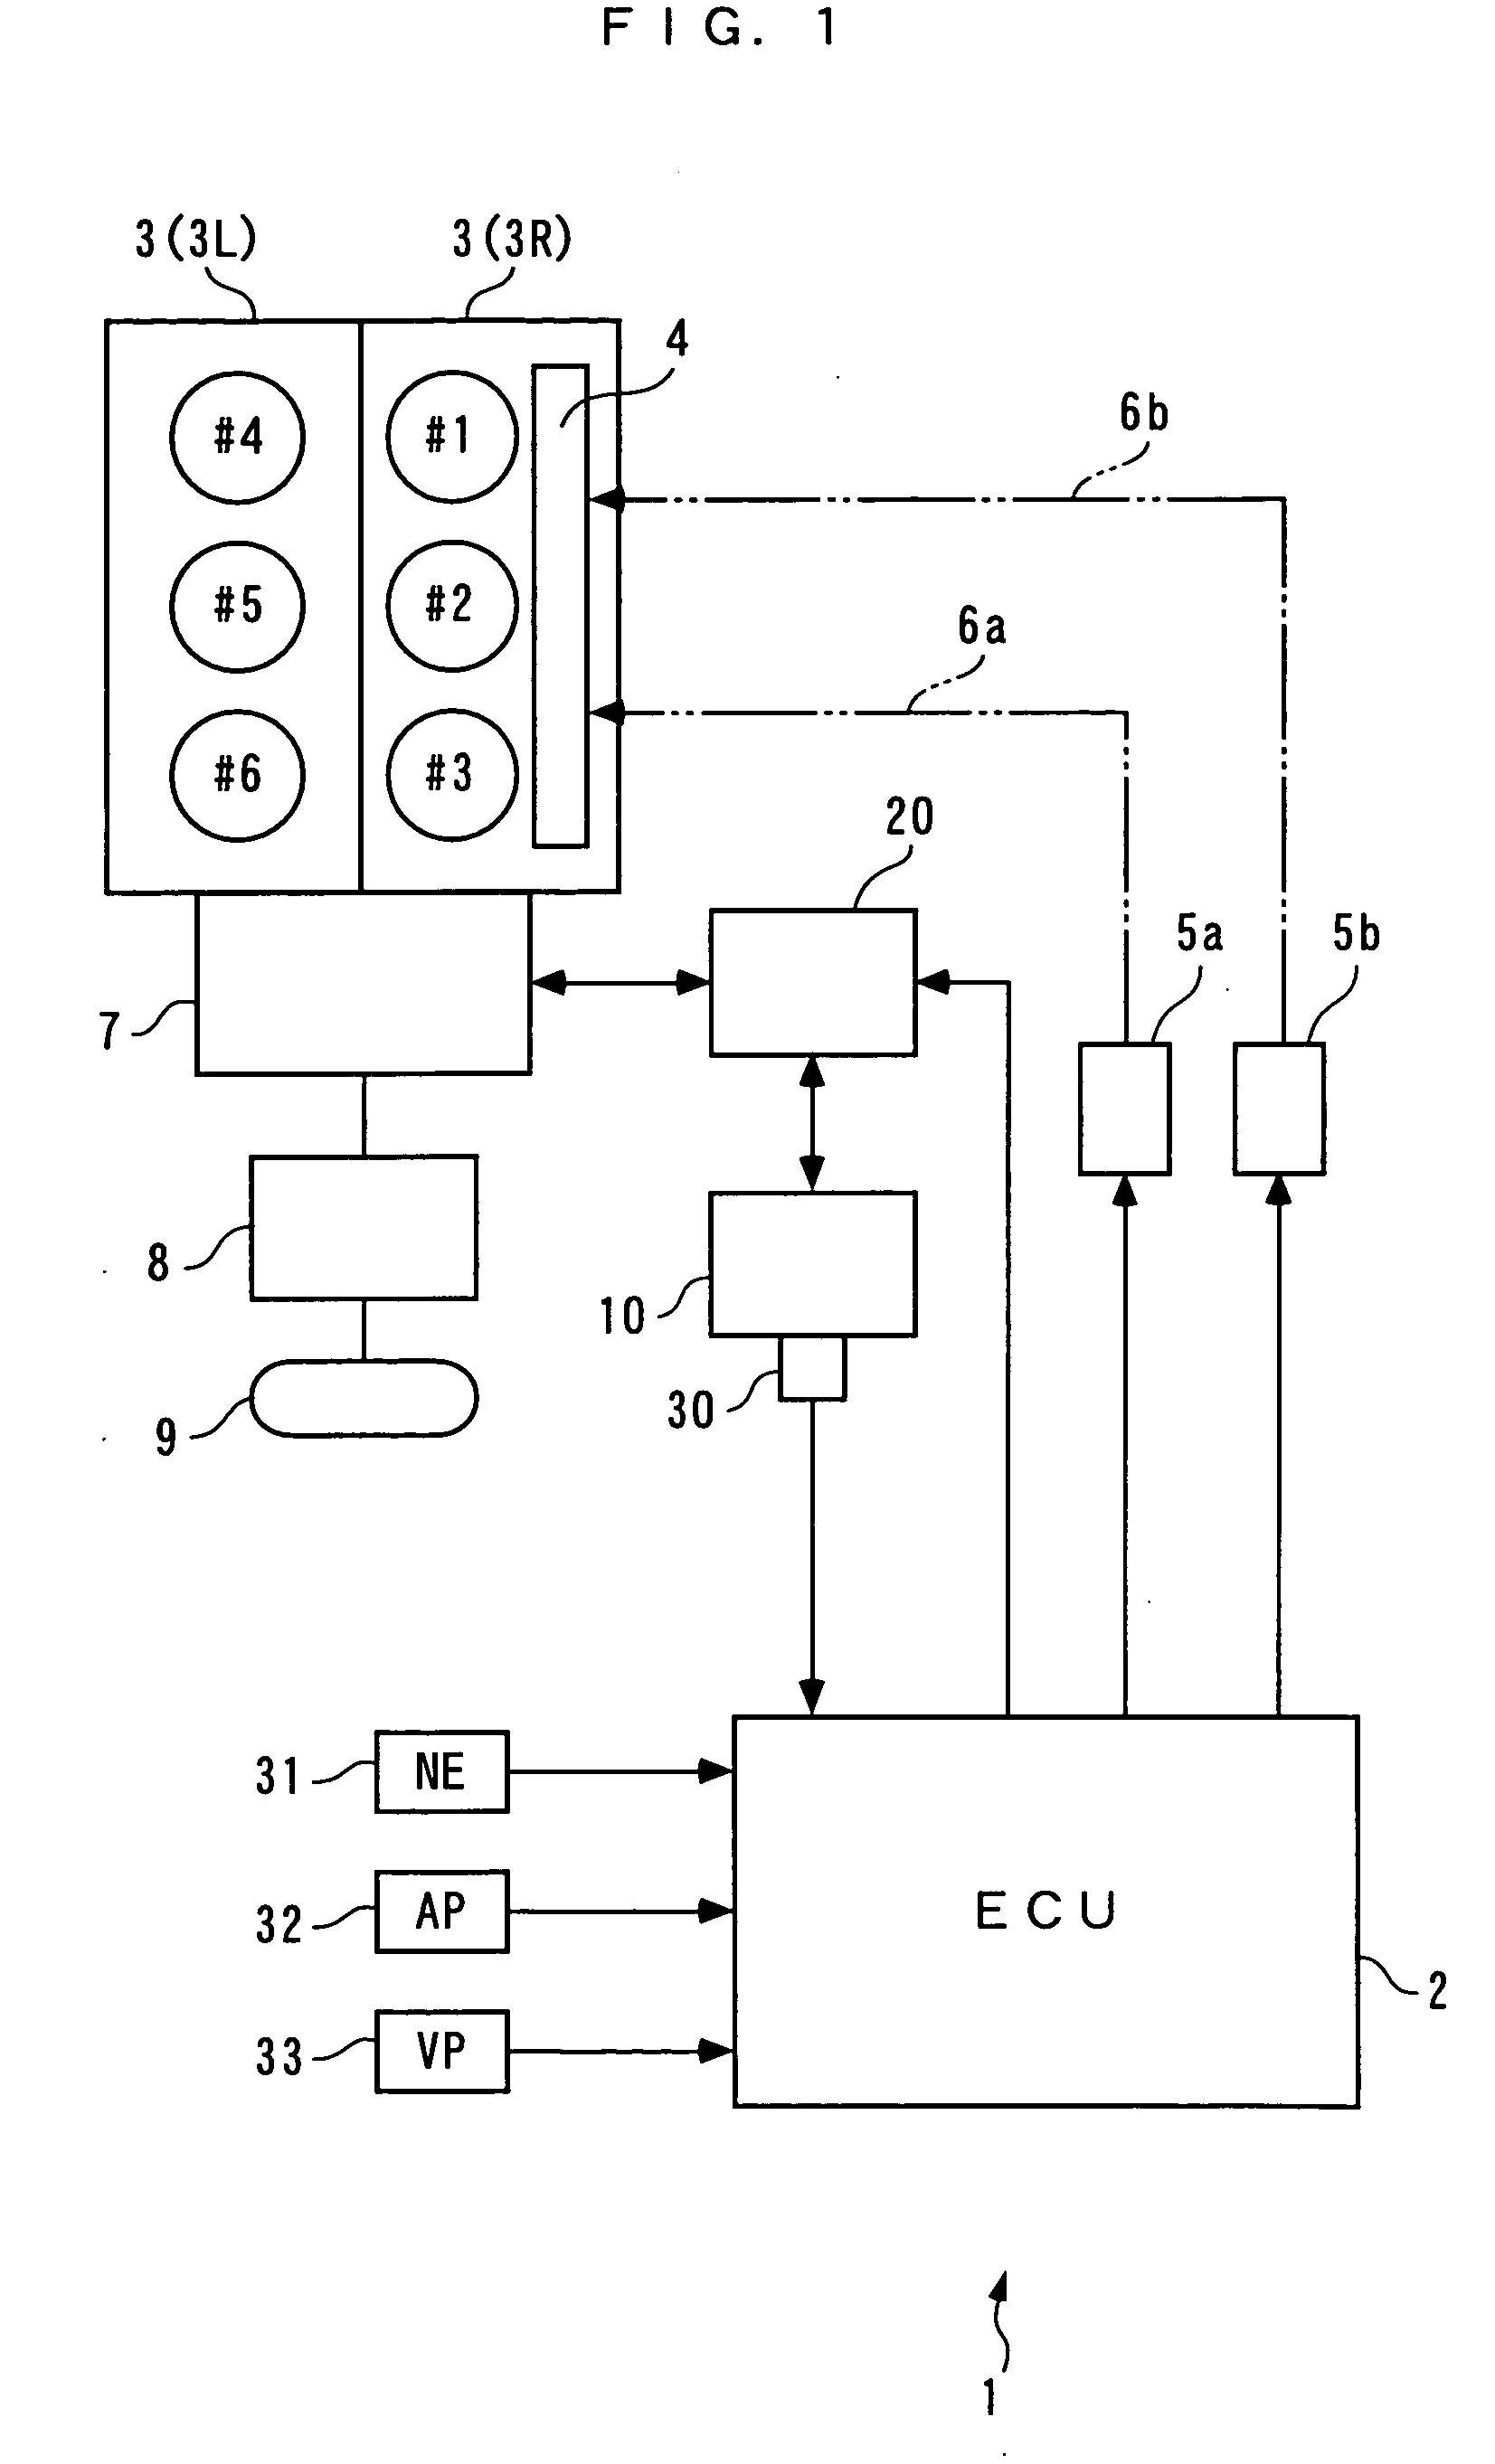 Control system for variable-cylinder internal combustion engine